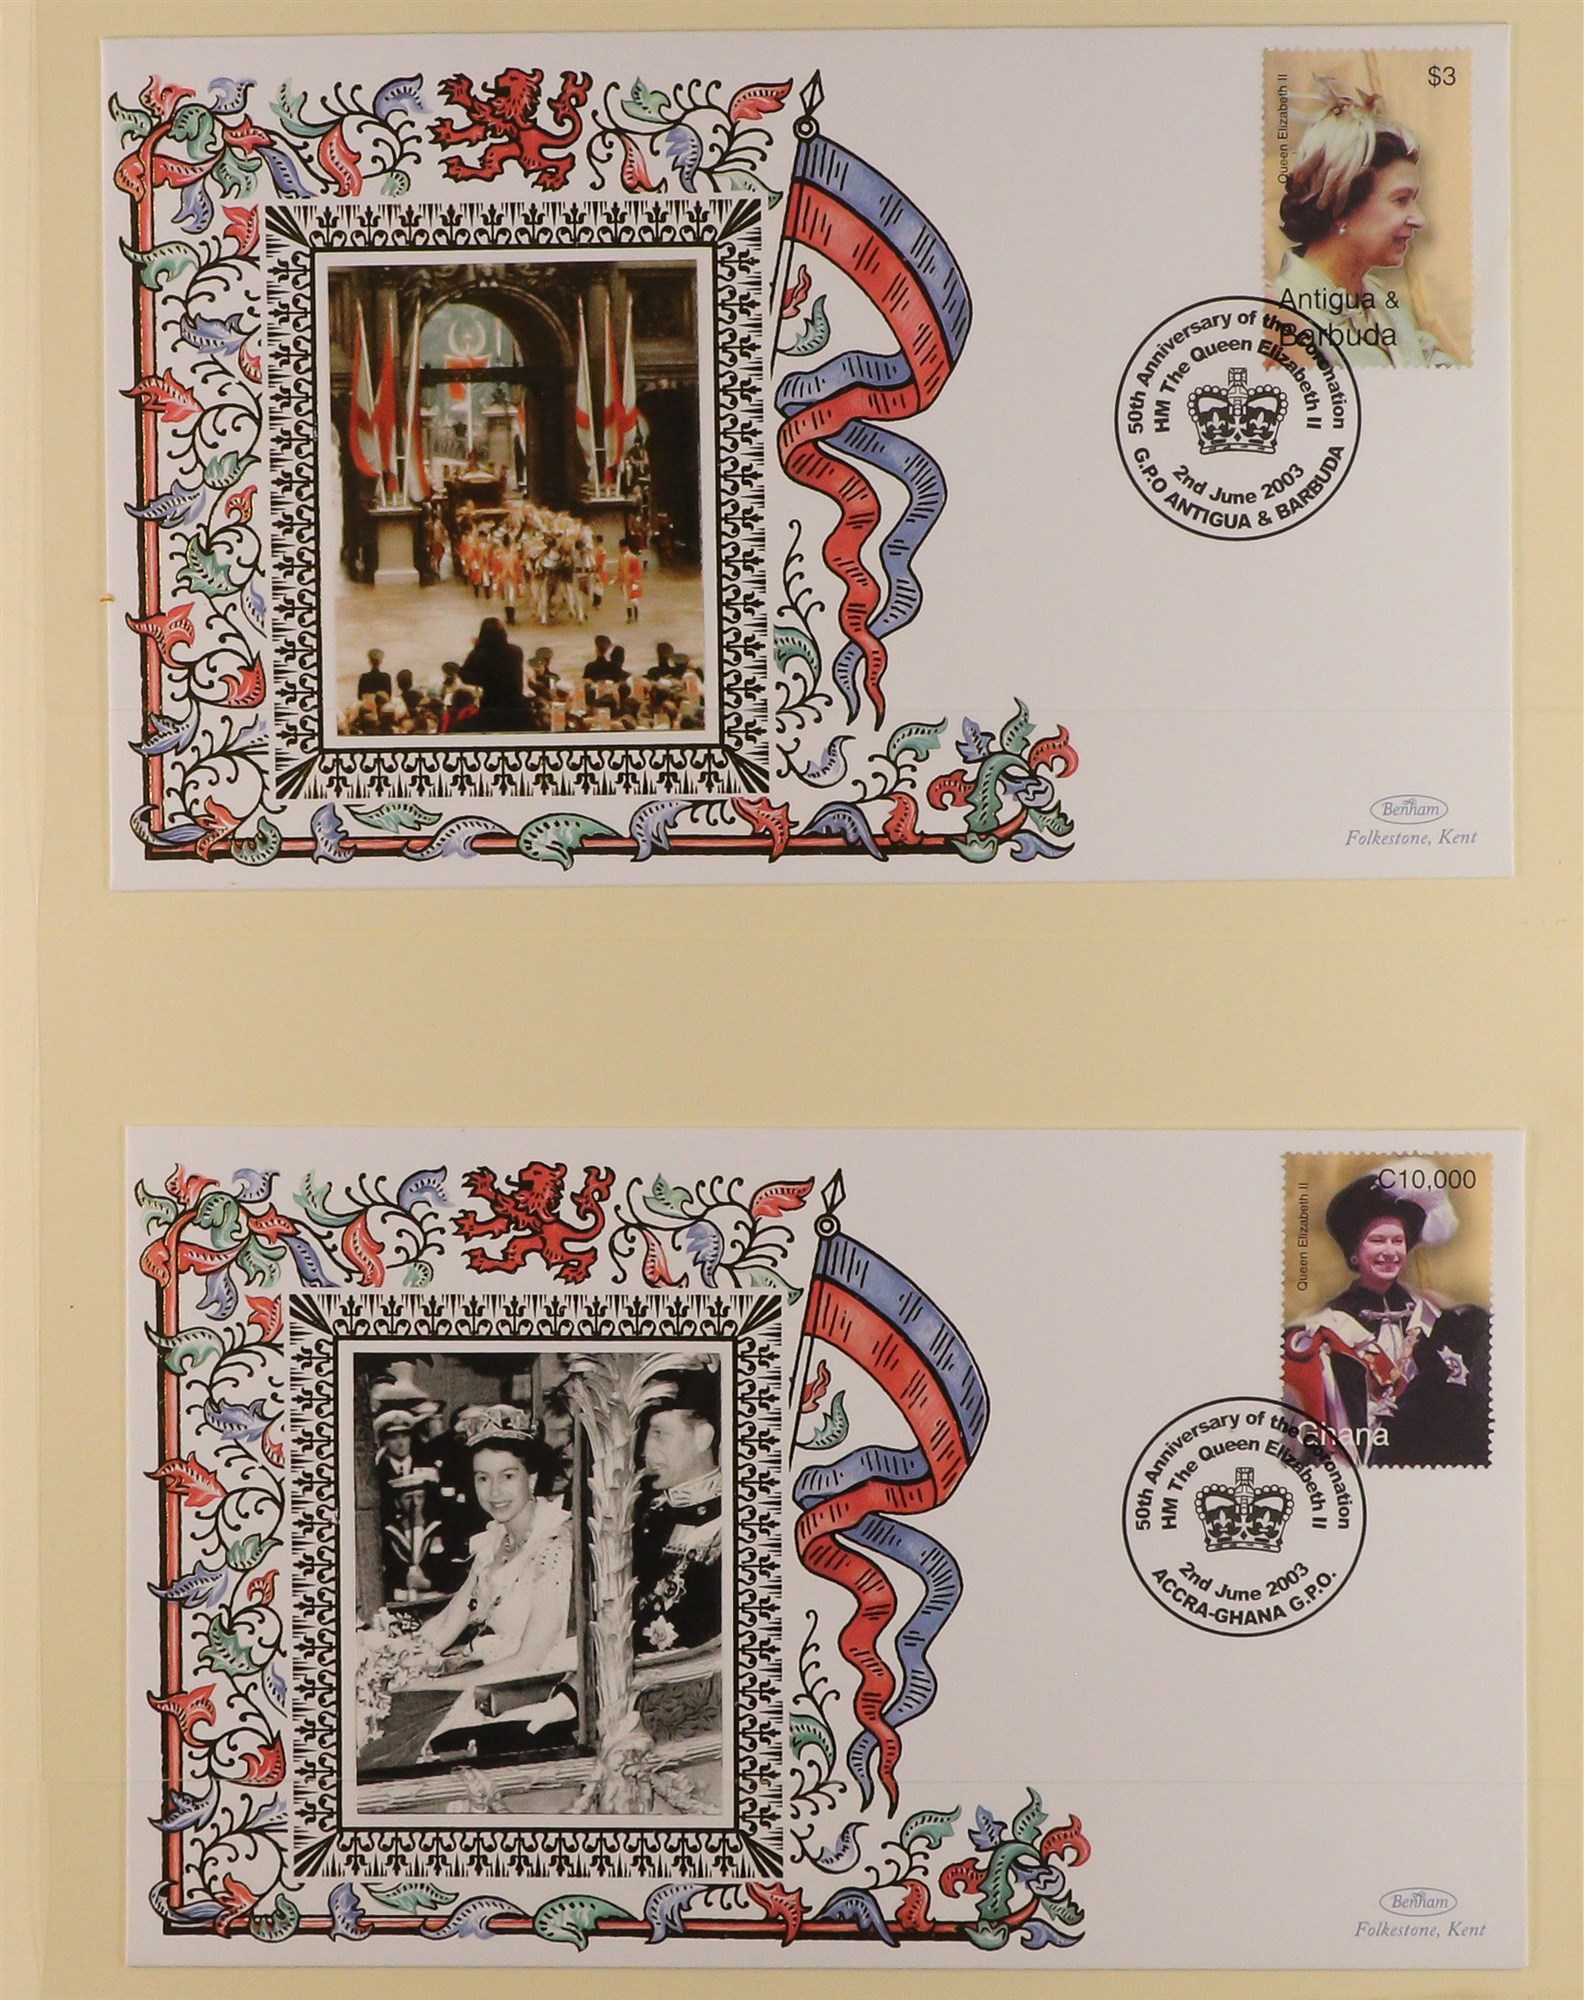 COLLECTIONS & ACCUMULATIONS 2003 CORONATION ANNIVERSARY British commonwealth collection of special - Image 4 of 5